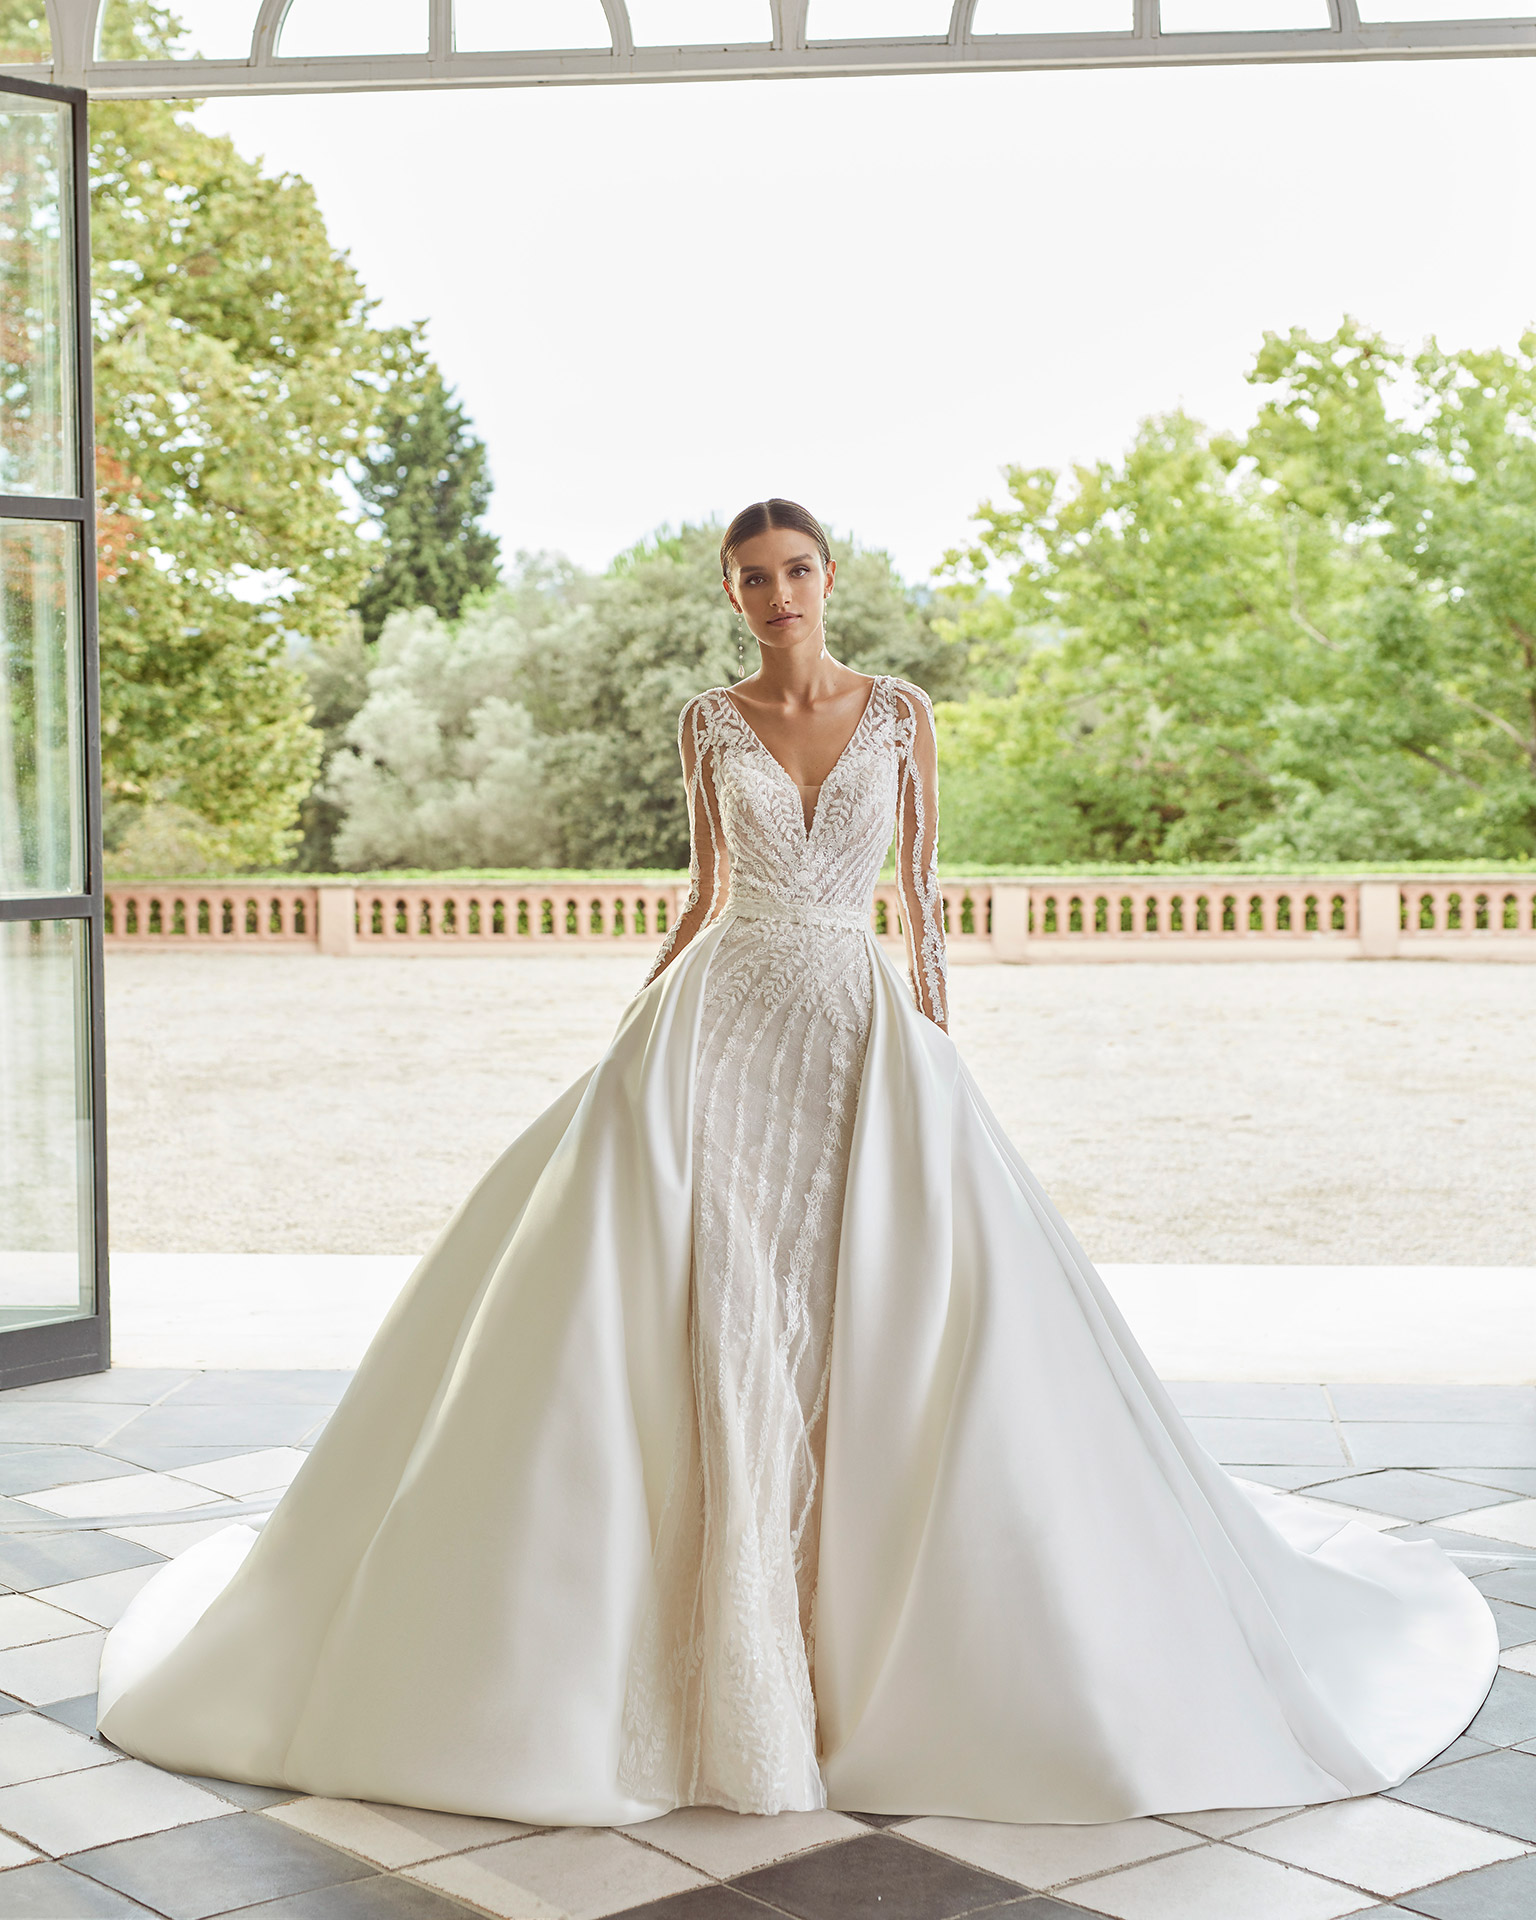 Two-piece ballgown-style wedding dress, with an overskirt with buttons throughout the skirt; with a deep-plunge neckline with embroidered paillette detail, a button-up back with sheer inserts, and long sleeves. Delicate Luna Studio outfit made of tulle, lace embellished with beadwork, and Mikado. LUNA_NOVIAS.